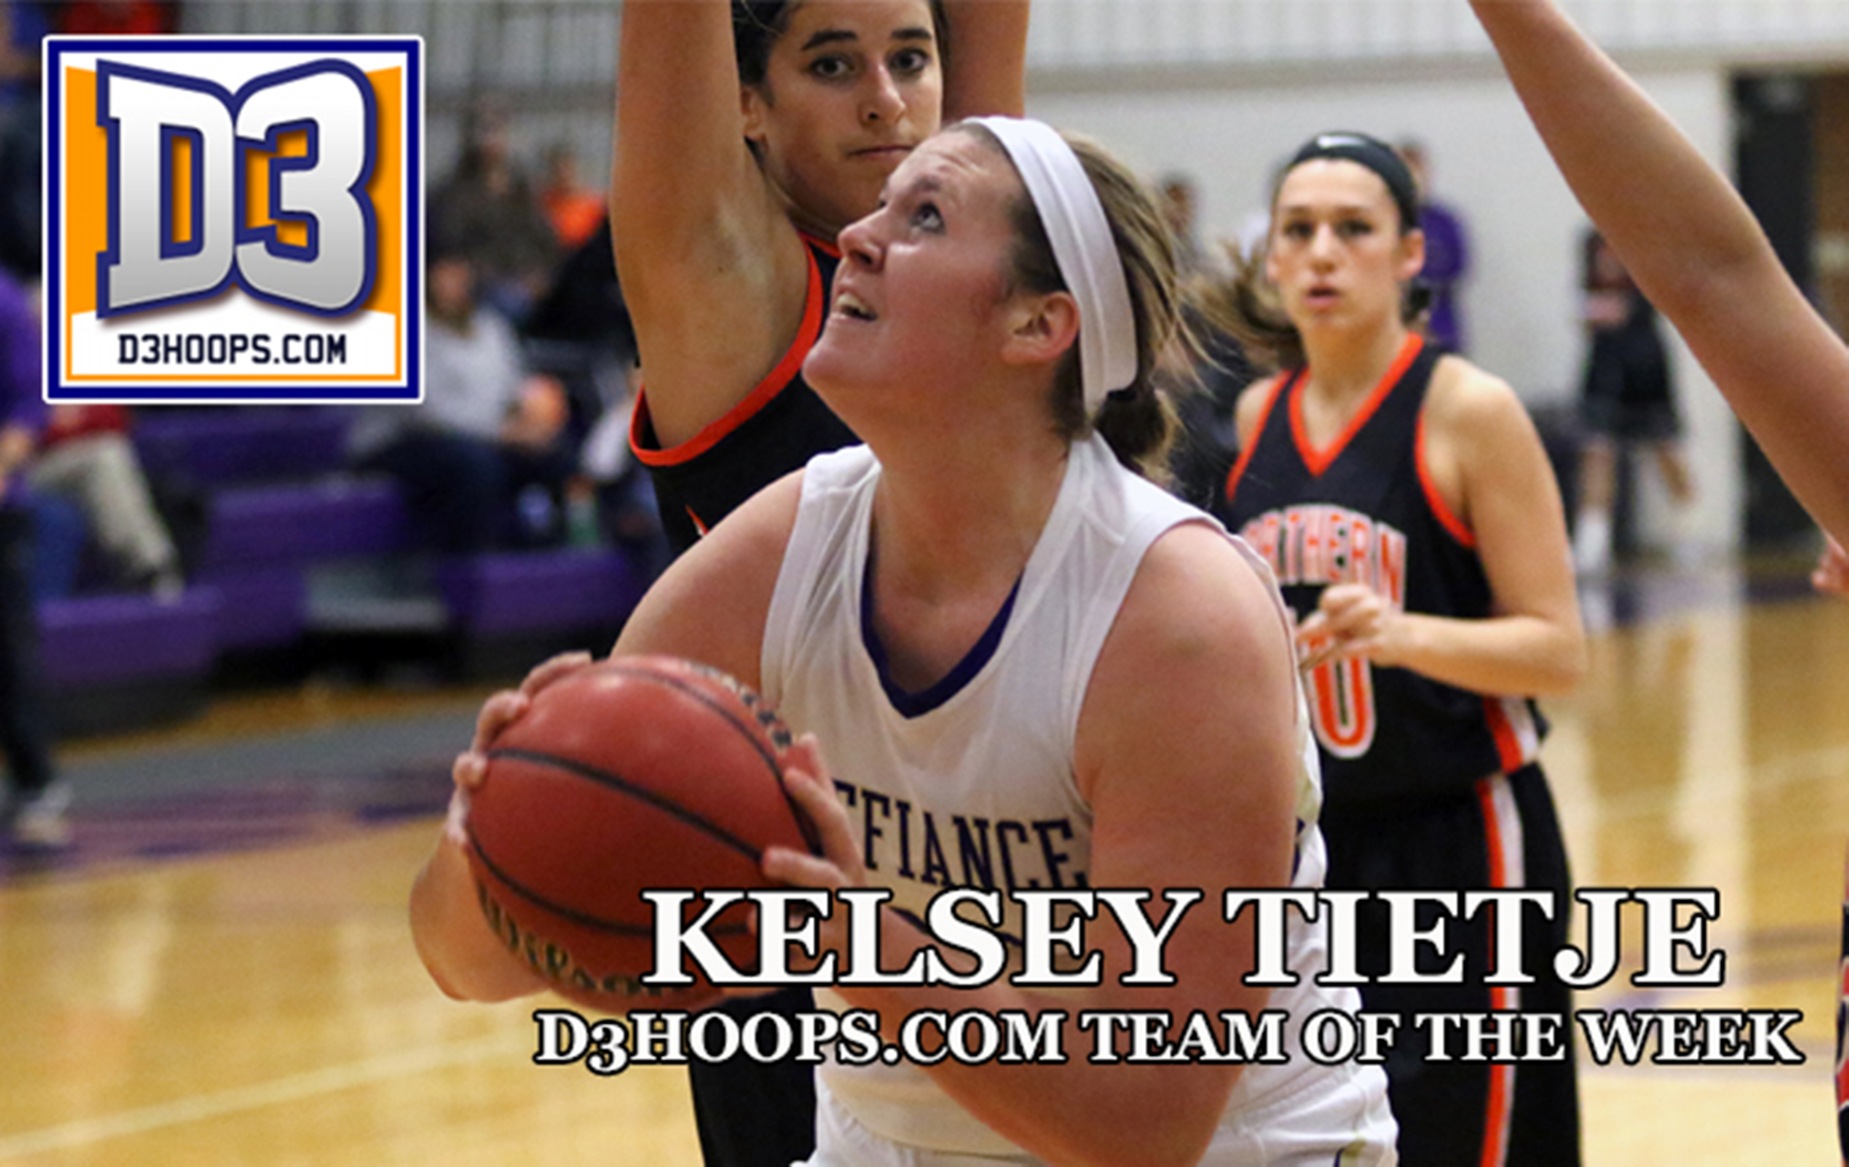 Tietje Selected to D3hoops.com National Team of the Week